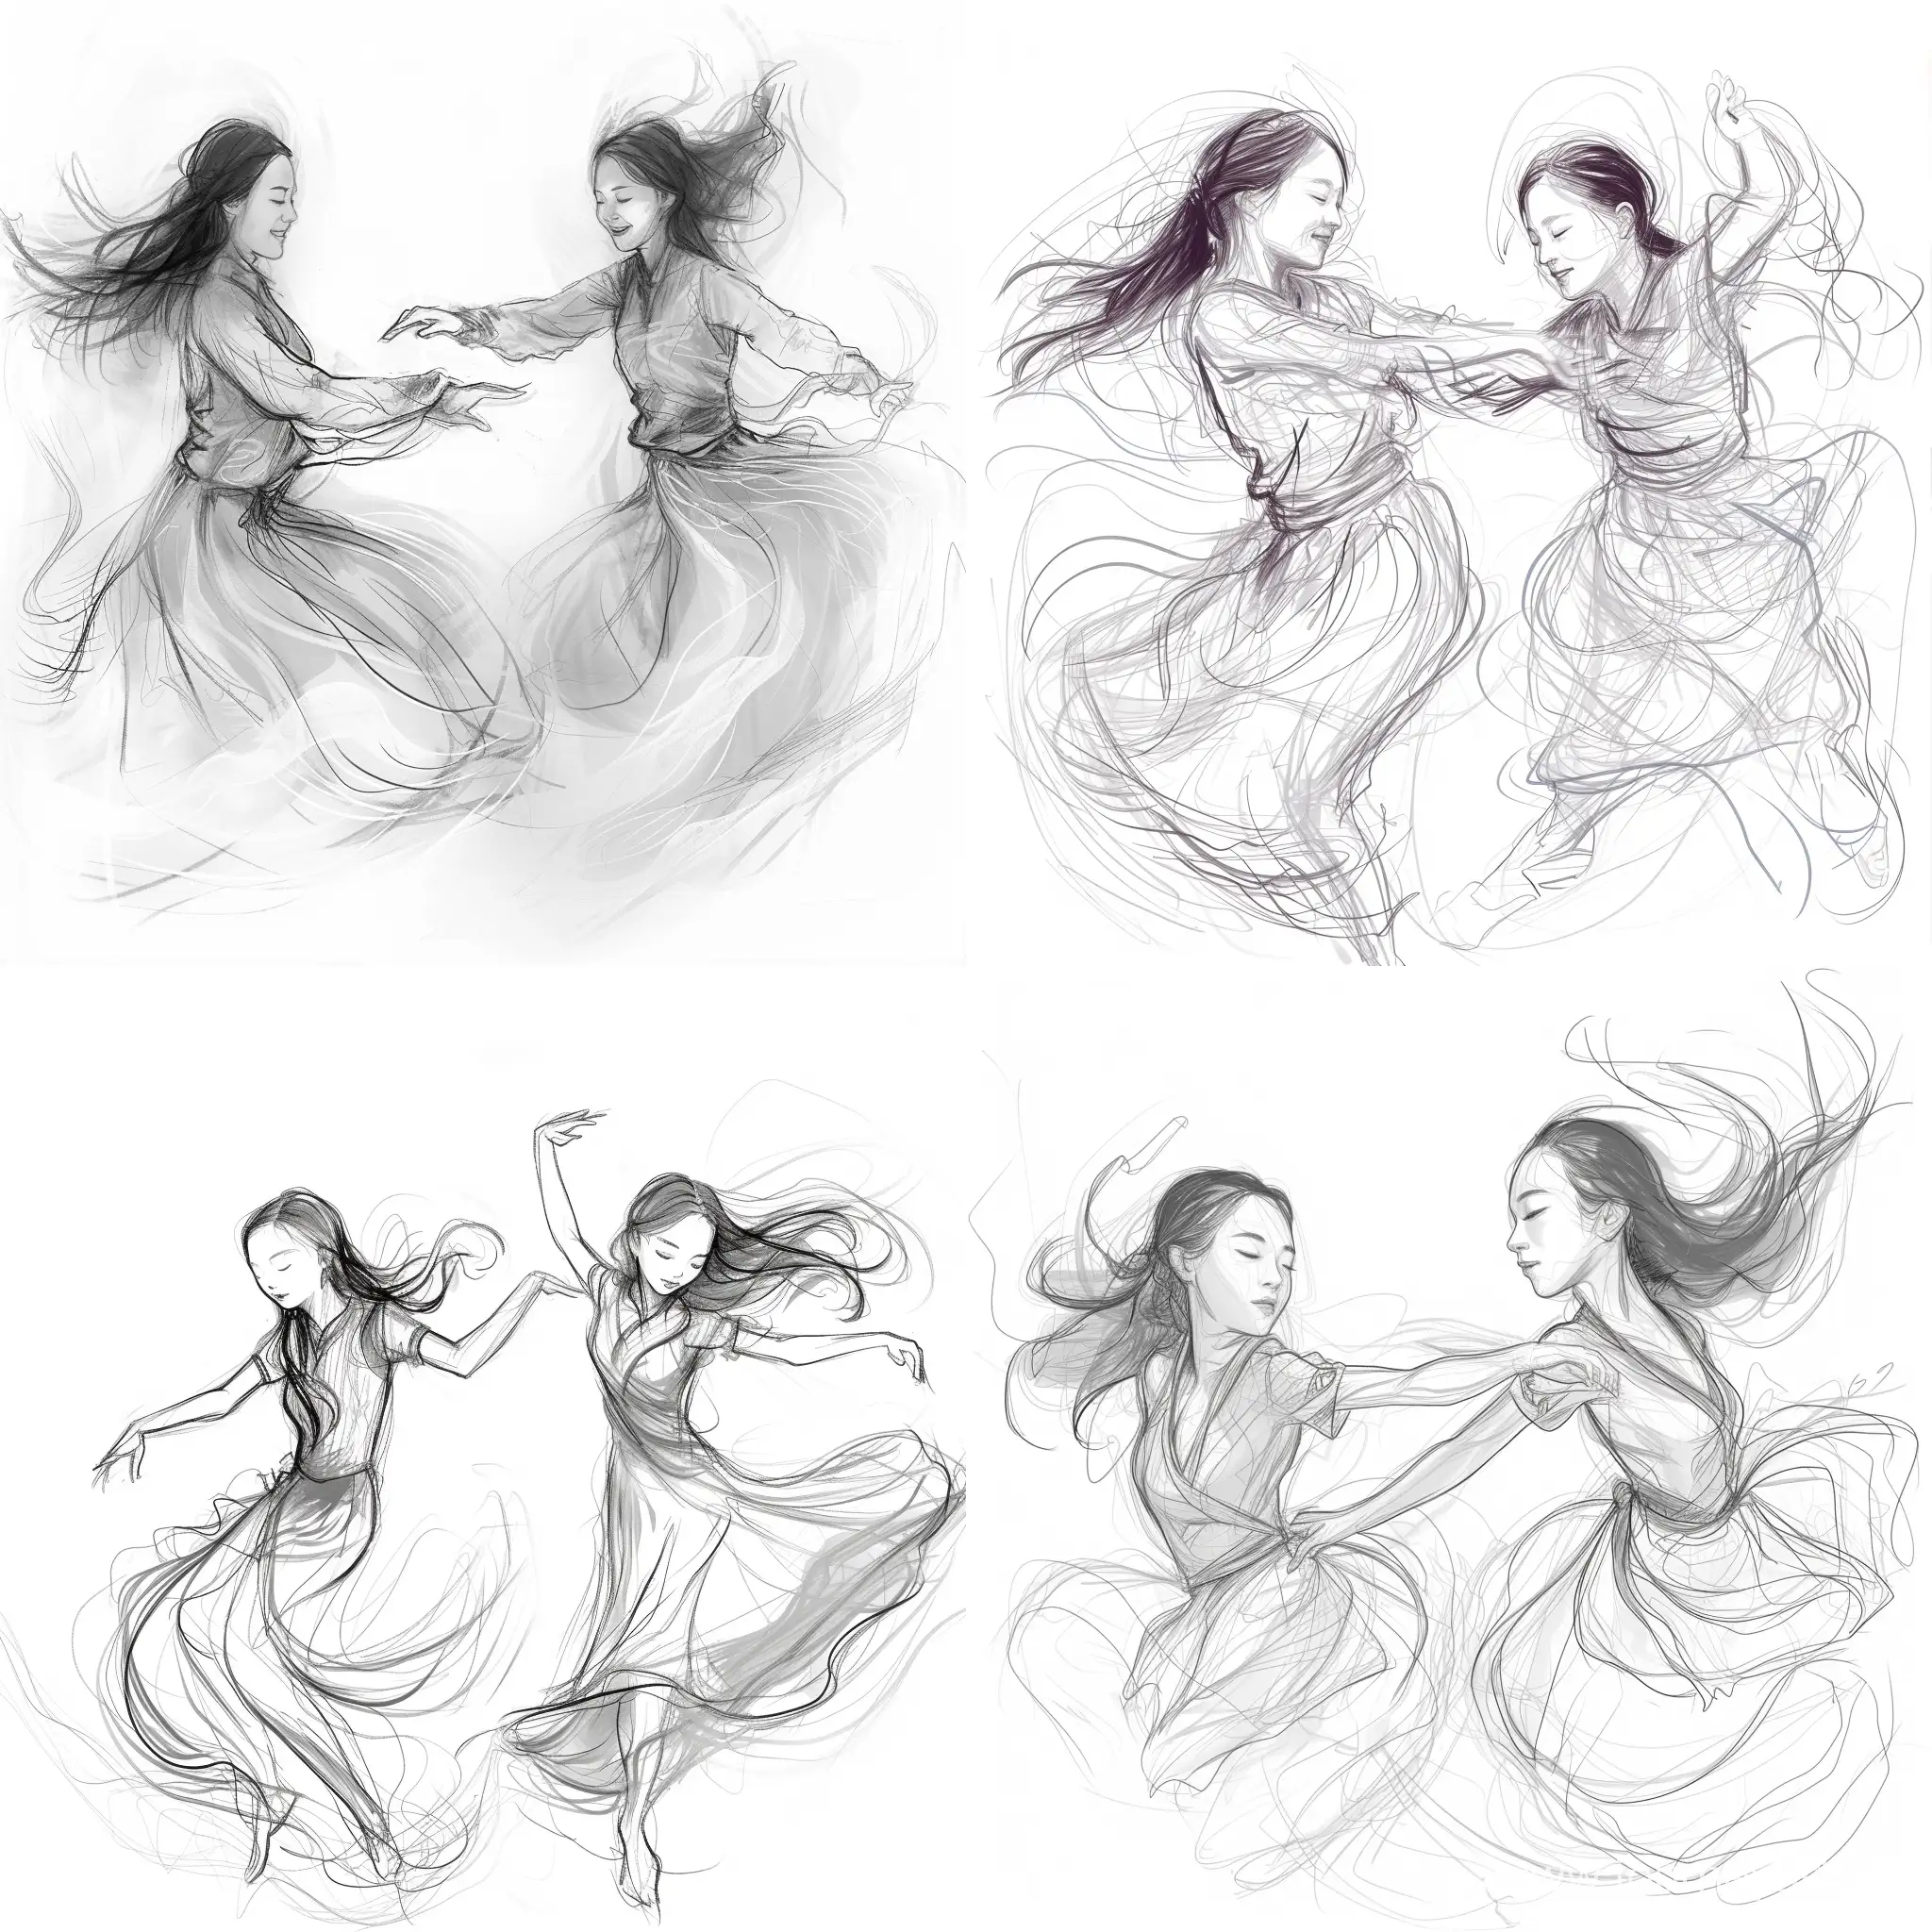 two dancing girls in the image of rivers, their movements are light weightless,the girls' faces are Asian, their facial features are proud and majestic, the sketch drawing style is full-length
